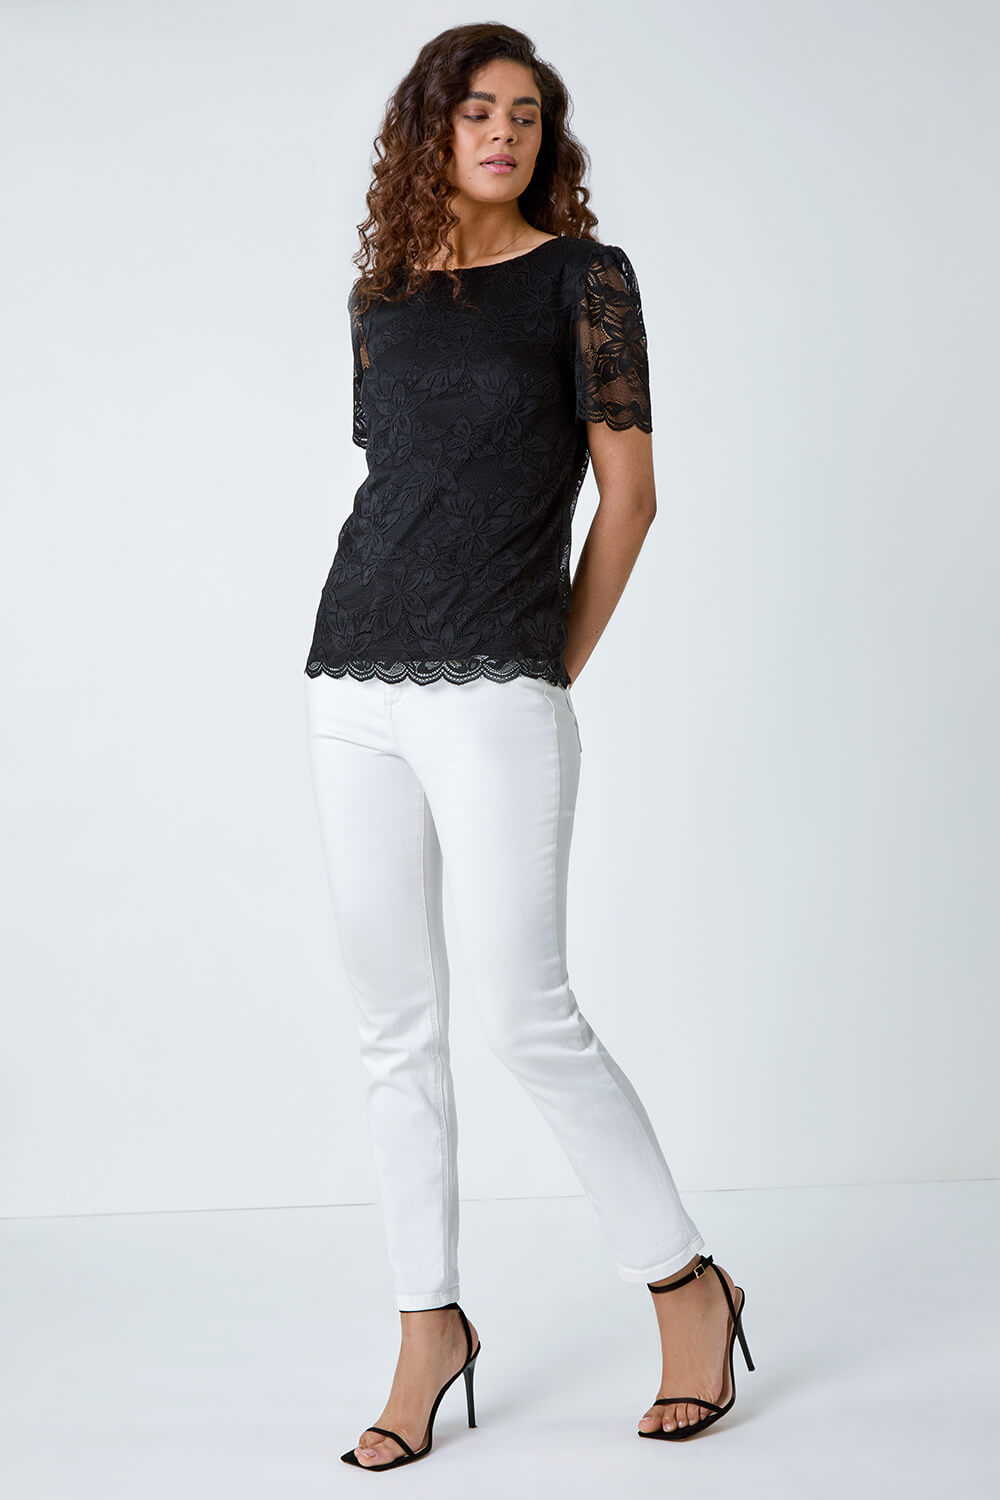 Black Floral Stretch Lace Top, Image 2 of 5